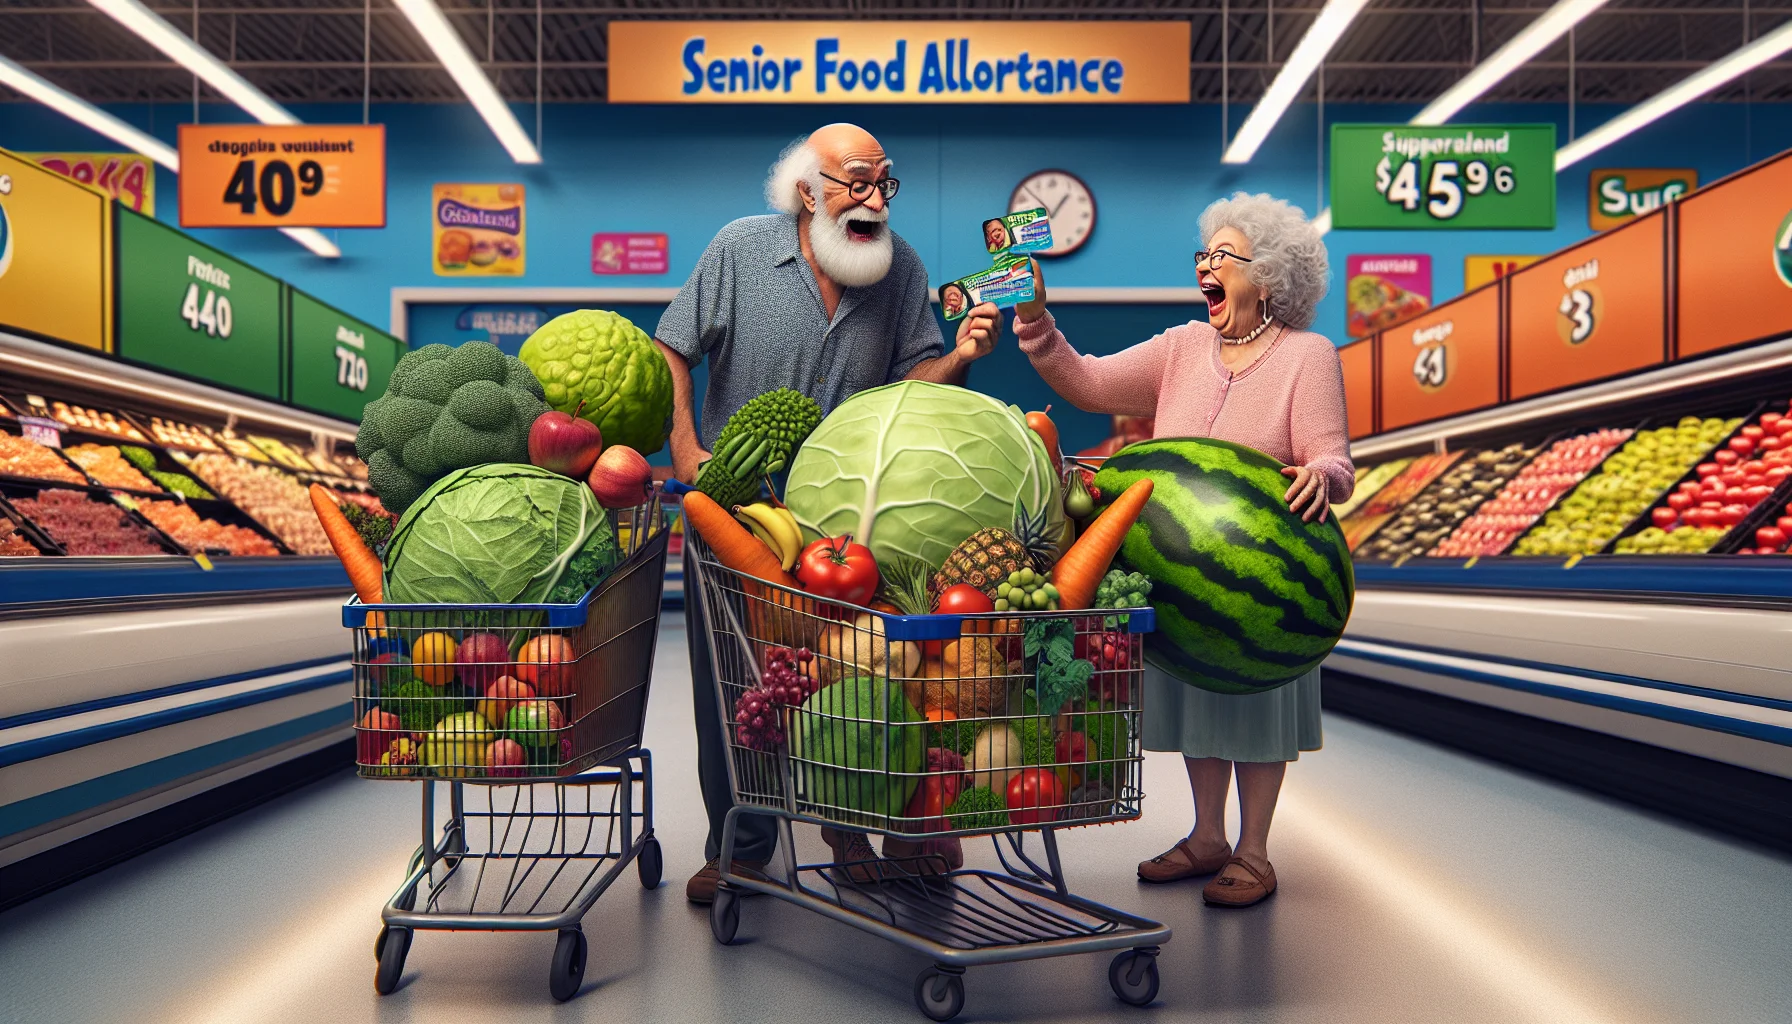 Create a humorously realistic image capturing a scene at a supermarket. A senior Caucasian gentleman and an elderly Hispanic lady are comparing their 'Senior Food Allowance' cards near the produce section in excitement. Their shopping carts are filled with a bizarre mishmash of healthy foods, fruits, vegetables, and quirky diet items like gigantic cabbages, abnormally large carrots, and mini watermelons. Emphasize bright colors and laughter to highlight the funny aspects of their dietary routines.